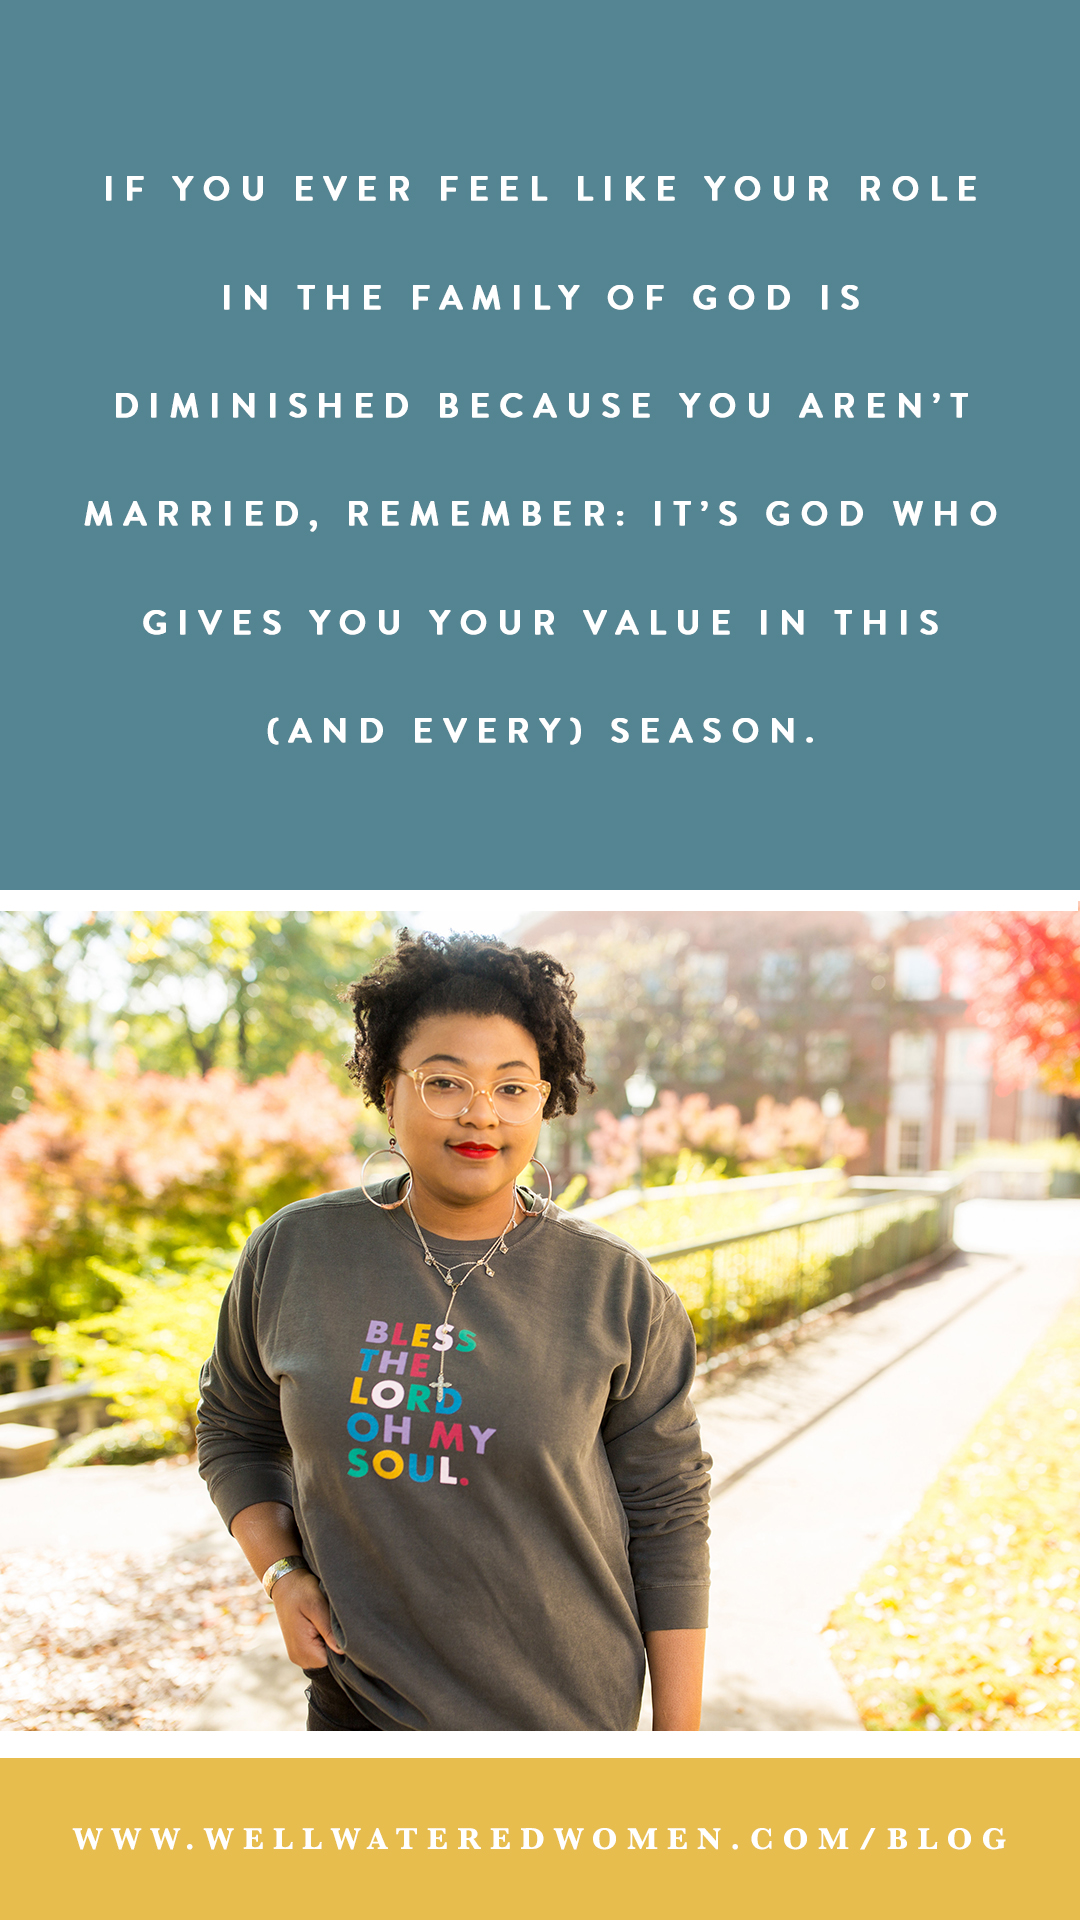 If you ever feel like your role in the family of God is diminished because you aren’t married, remember: it’s God who gives you your value in this (and every) season. Look to Him, and don’t listen to the lies that the enemy wants you to believe to keep you from fully embracing your days, long or short, as a single person.